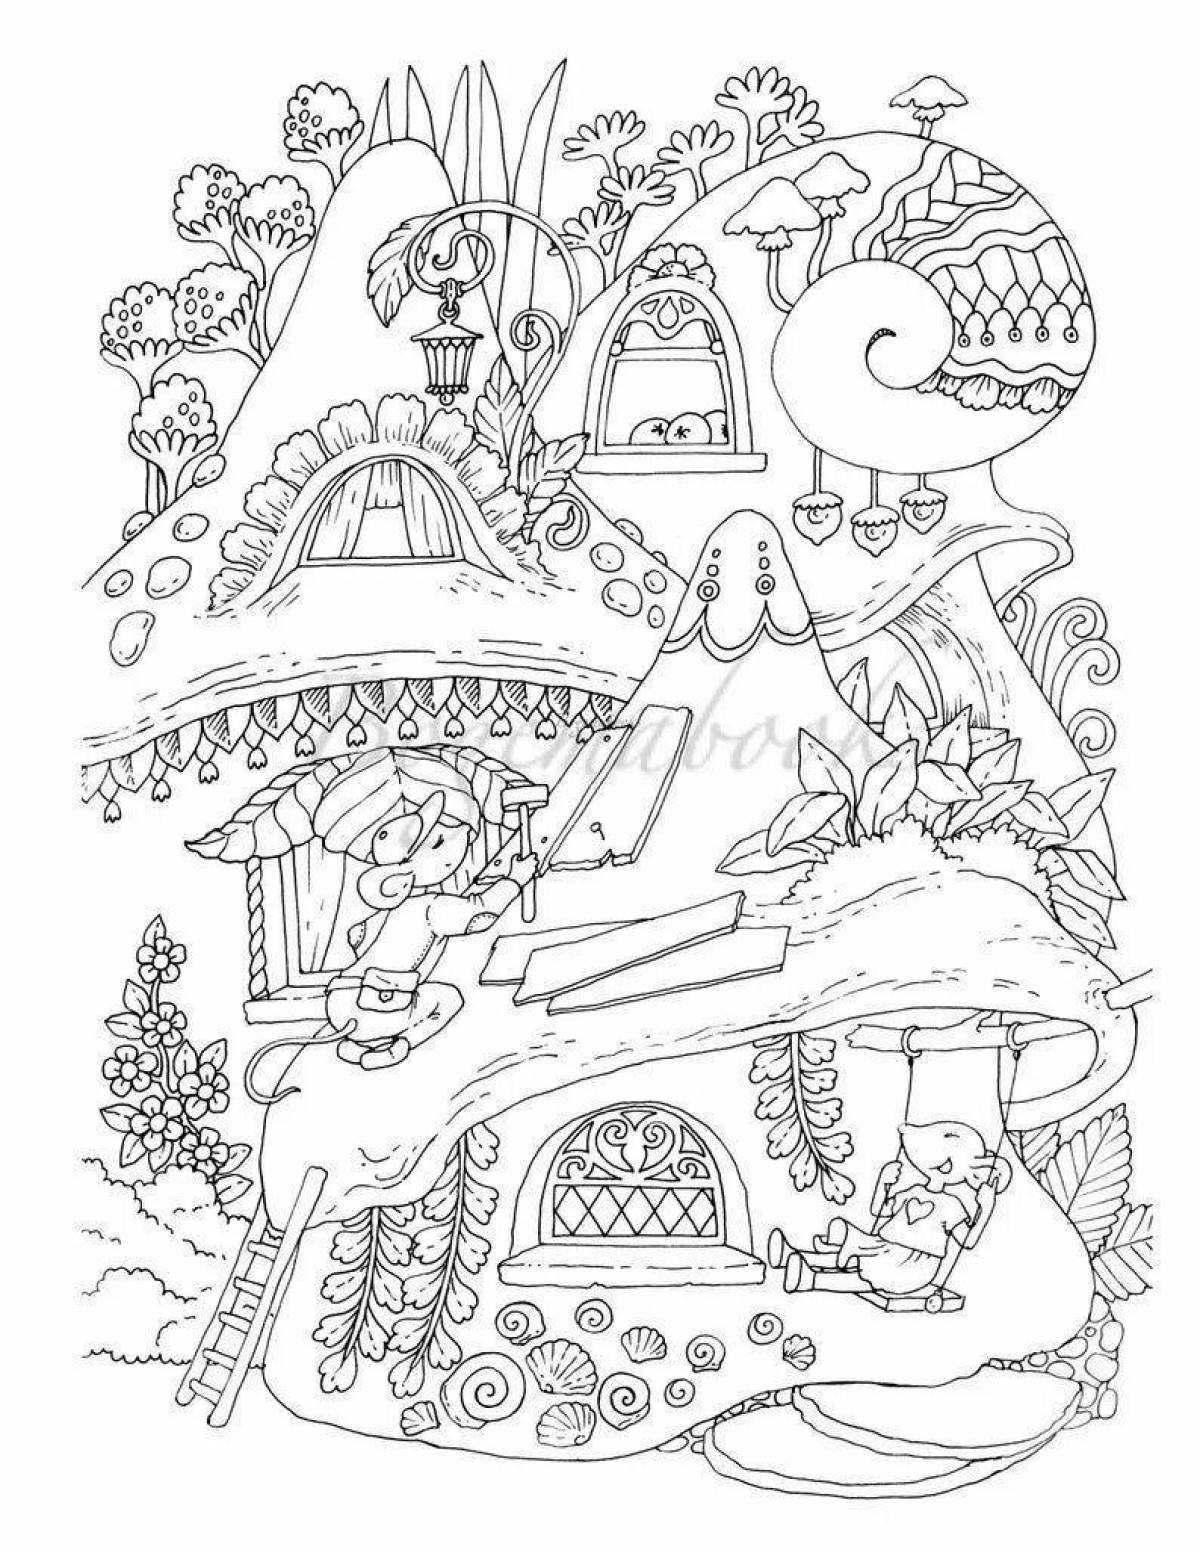 Coloring book shiny anti-stress houses